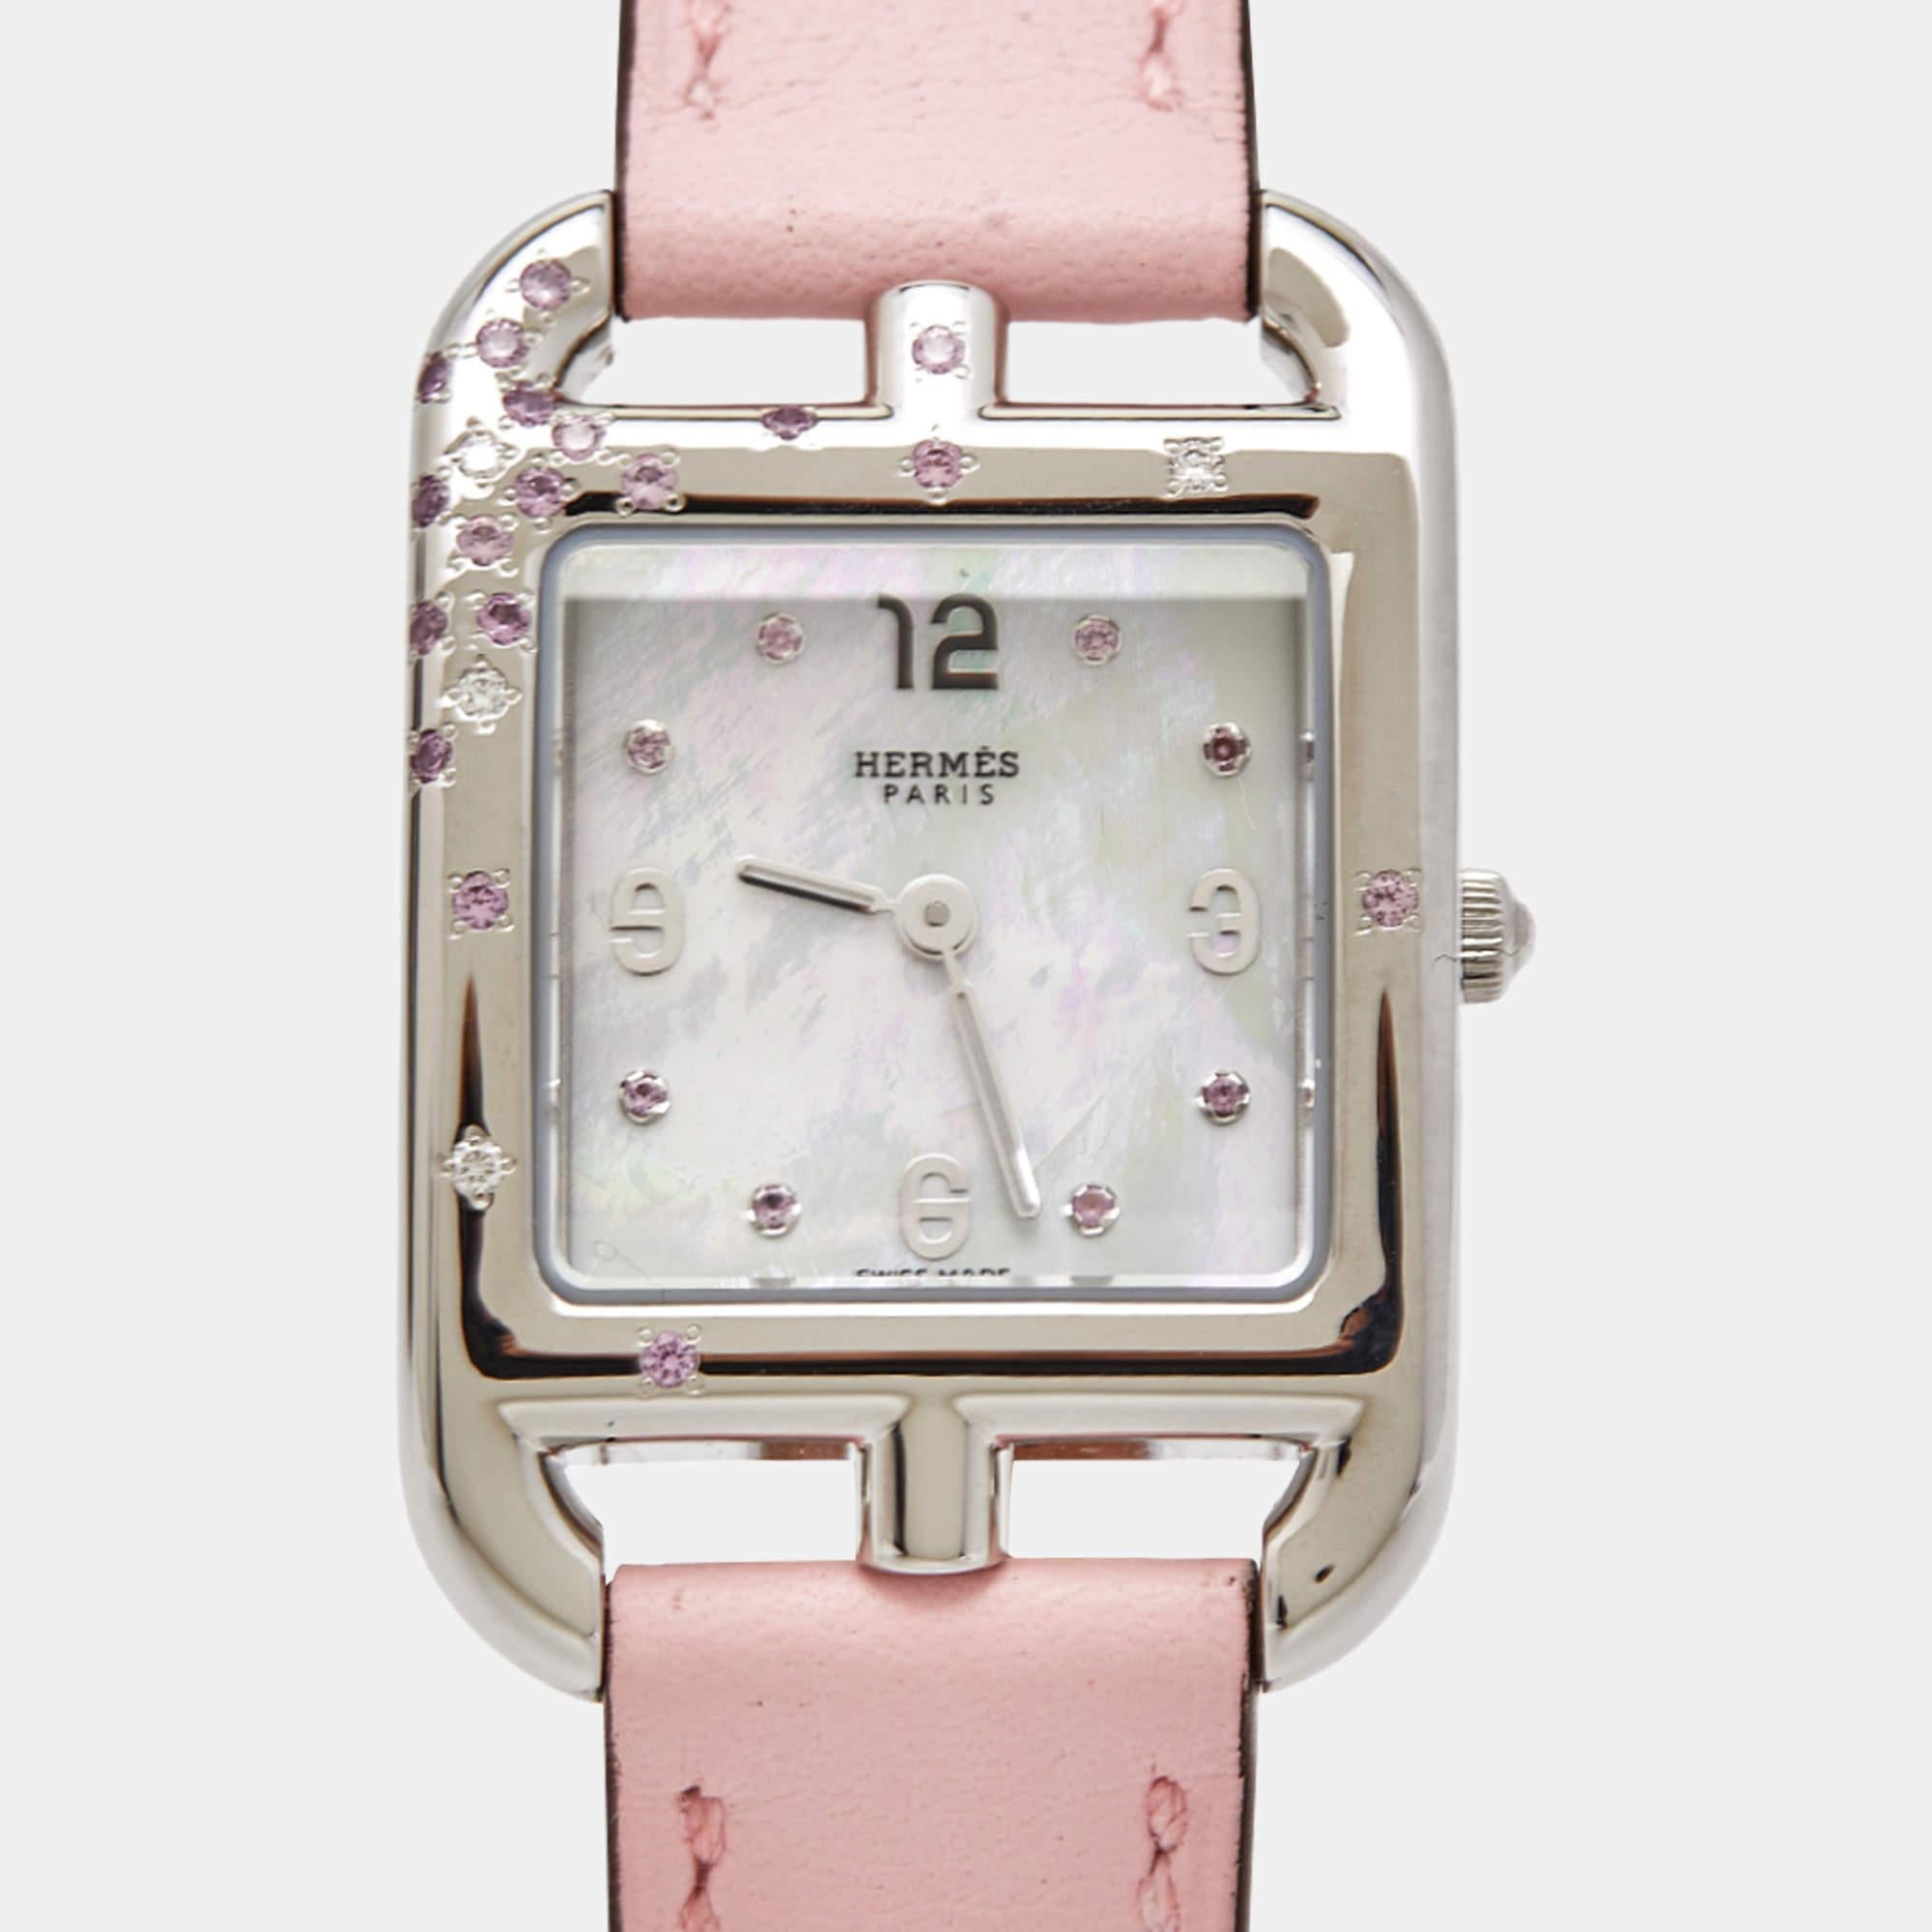 The Hermès wristwatch, model W052160WW00, is an exquisite timepiece designed for sophistication and elegance. Its stainless steel case boasts a lustrous mother-of-pearl dial adorned with sparkling diamonds and pink sapphires, exuding opulence. The